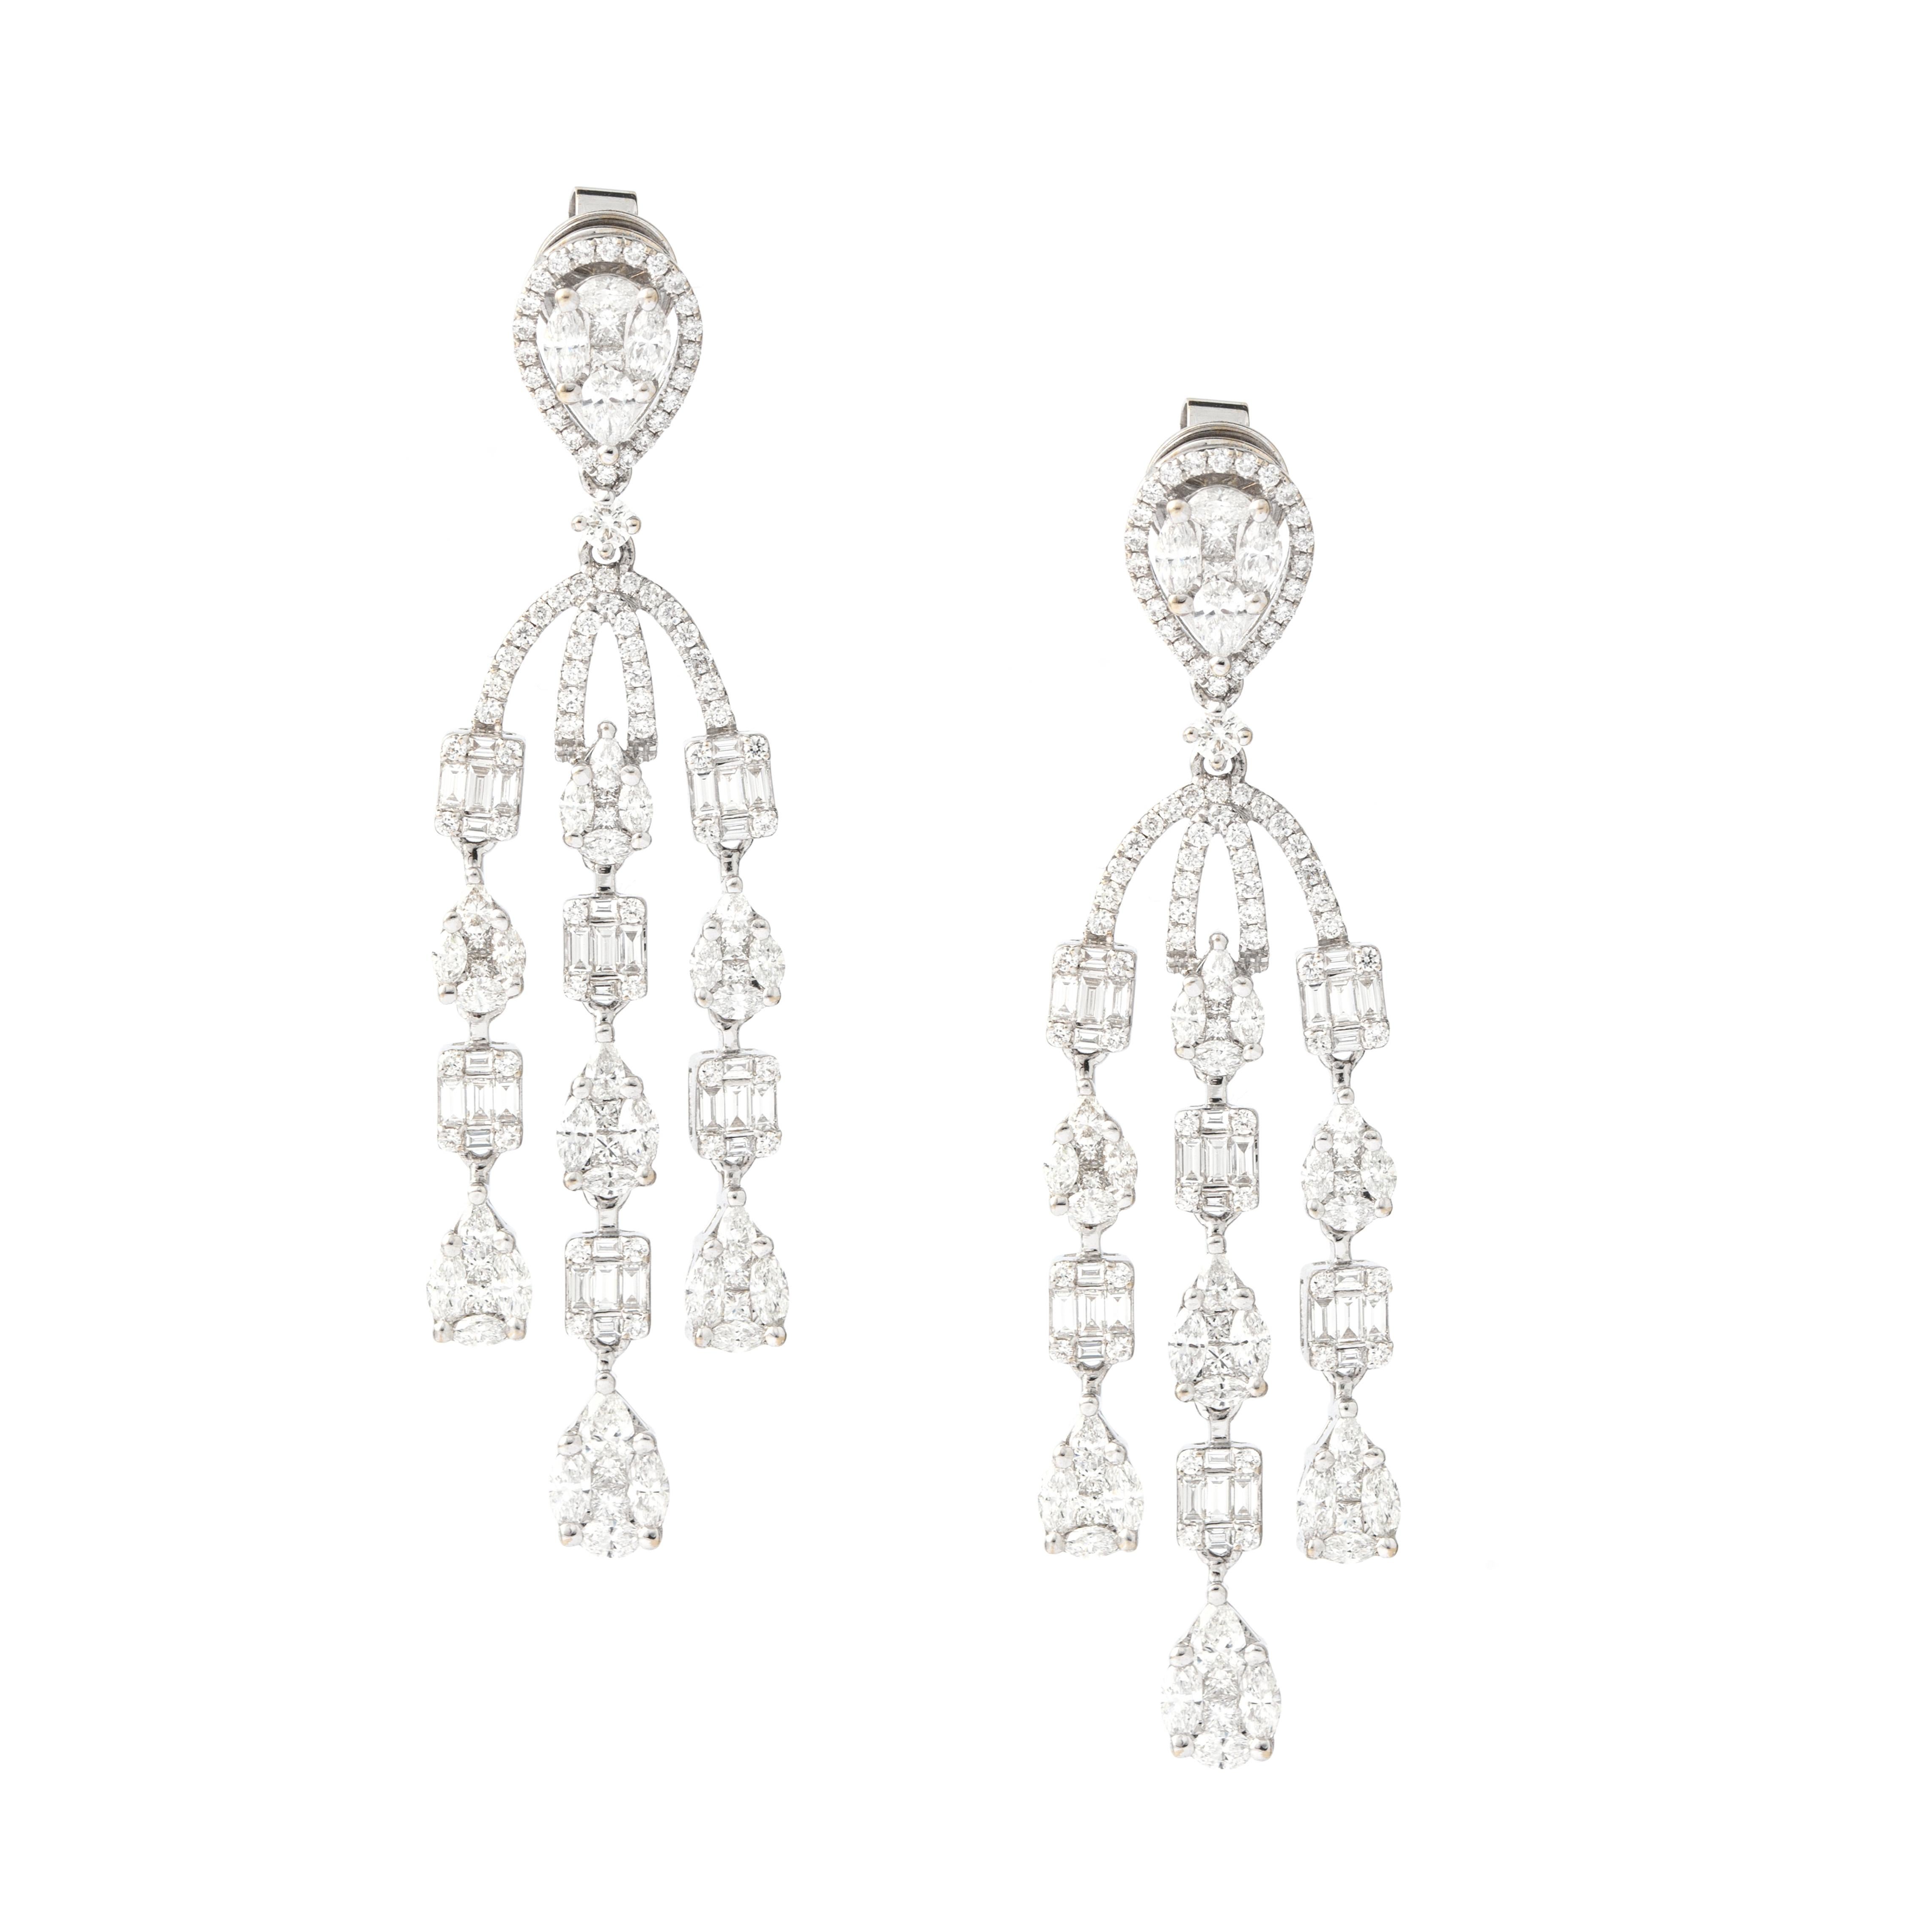 Earrings in 18kt white gold set with 156 pears shape, baguette, princess marquise cut diamonds 4.97 cts and 150 diamonds 1.08 cts.

Length: 6.00 centimeters (2.36 inches).

Maximum Width : 2.00 centimeters (0.79 inches).

Total weight: 19.05 grams.